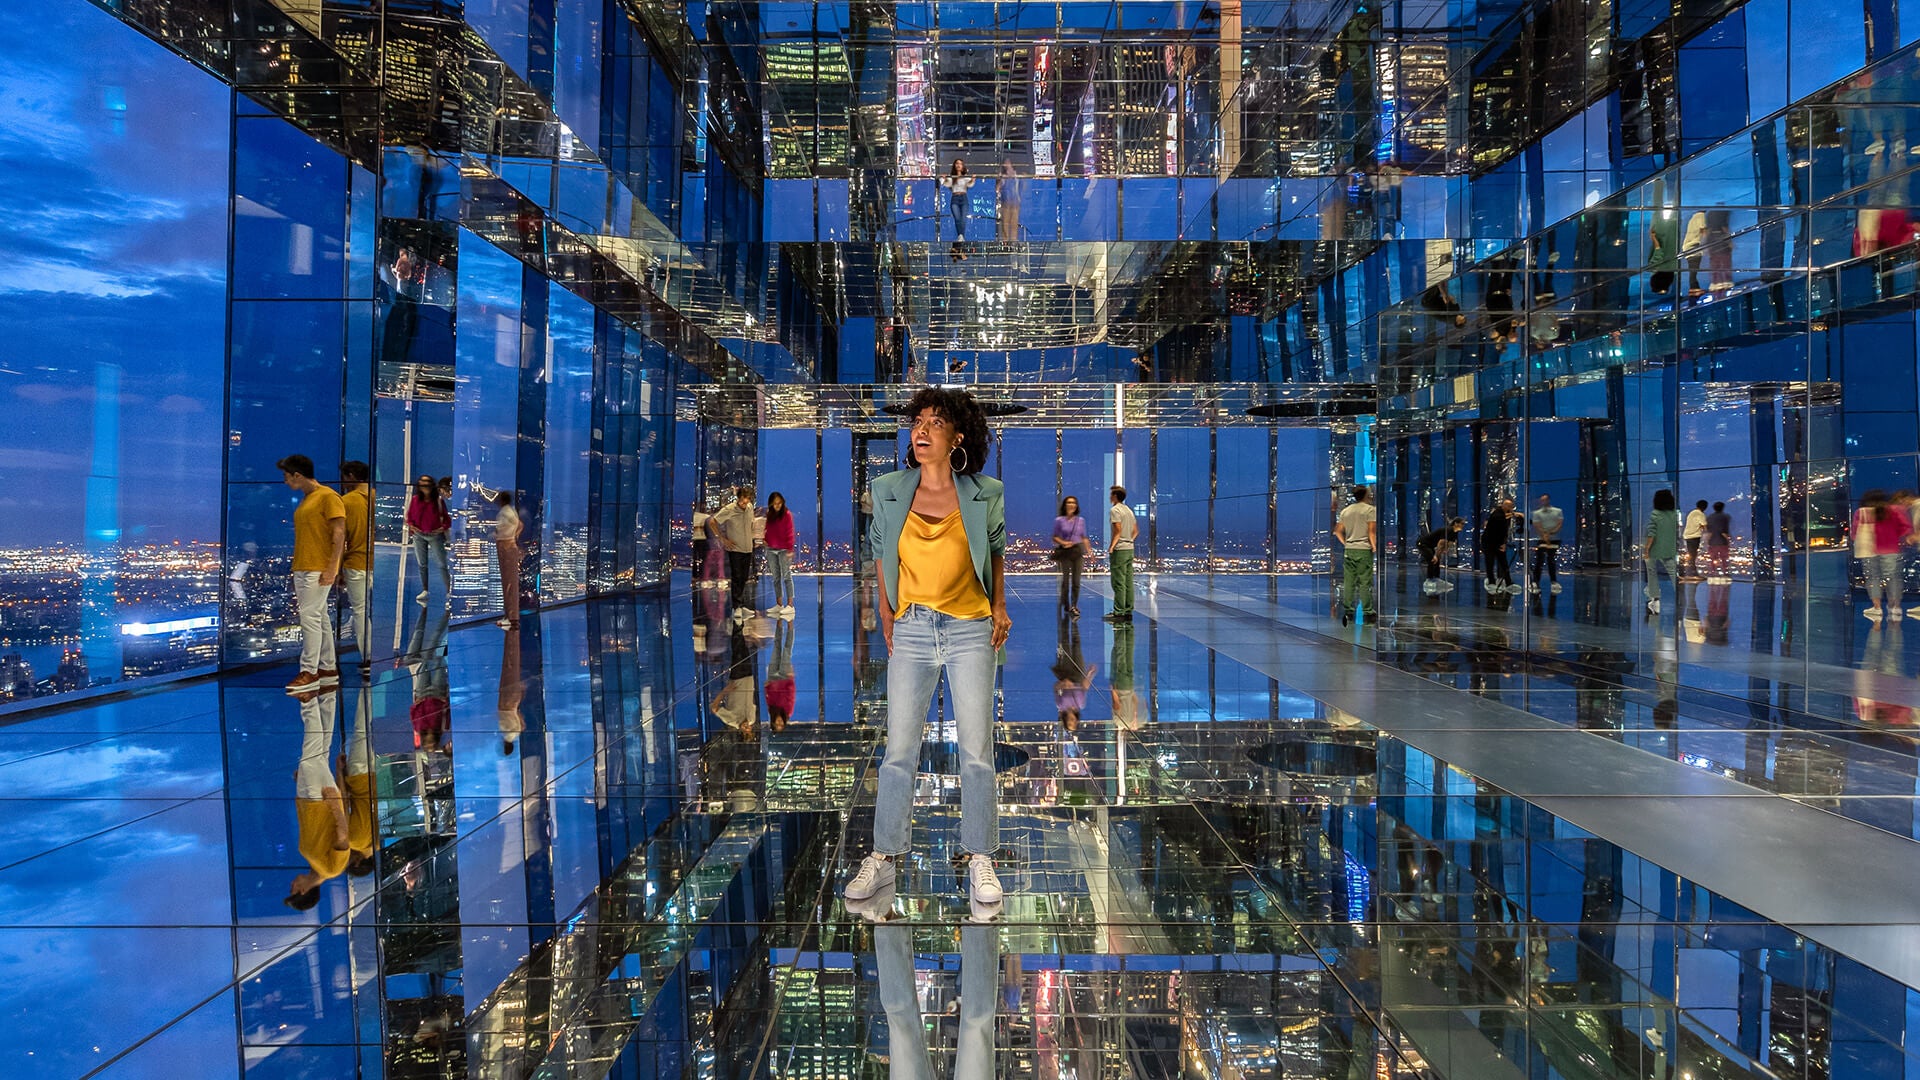 A woman marvels at the New York nightscape in a room of mirrors, where the city's lights multiply infinitely.